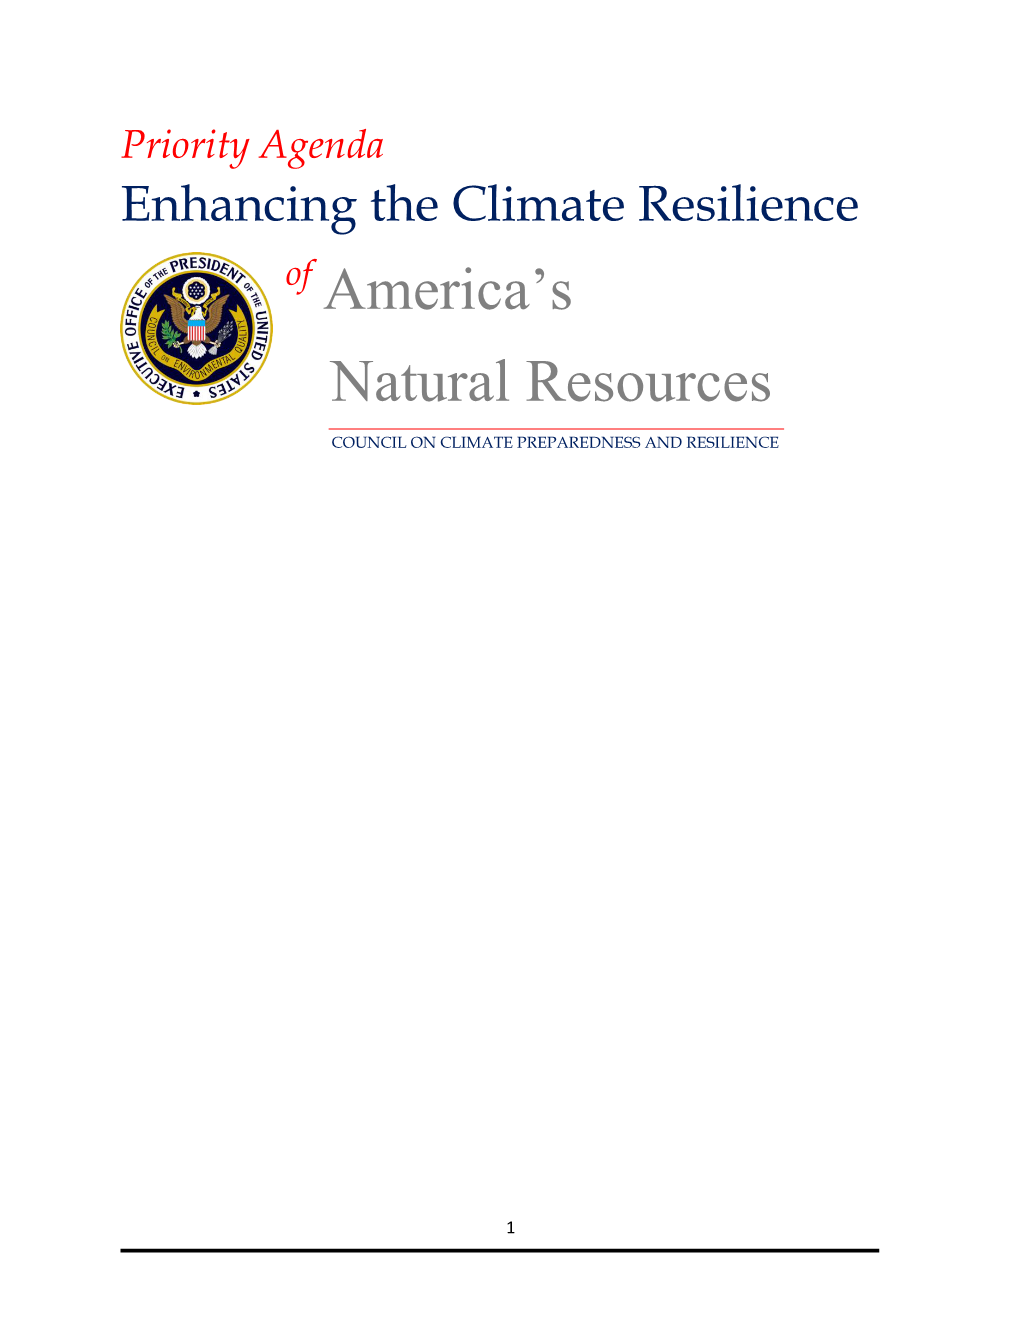 Enhancing the Climate Resilience of America's Natural Resources